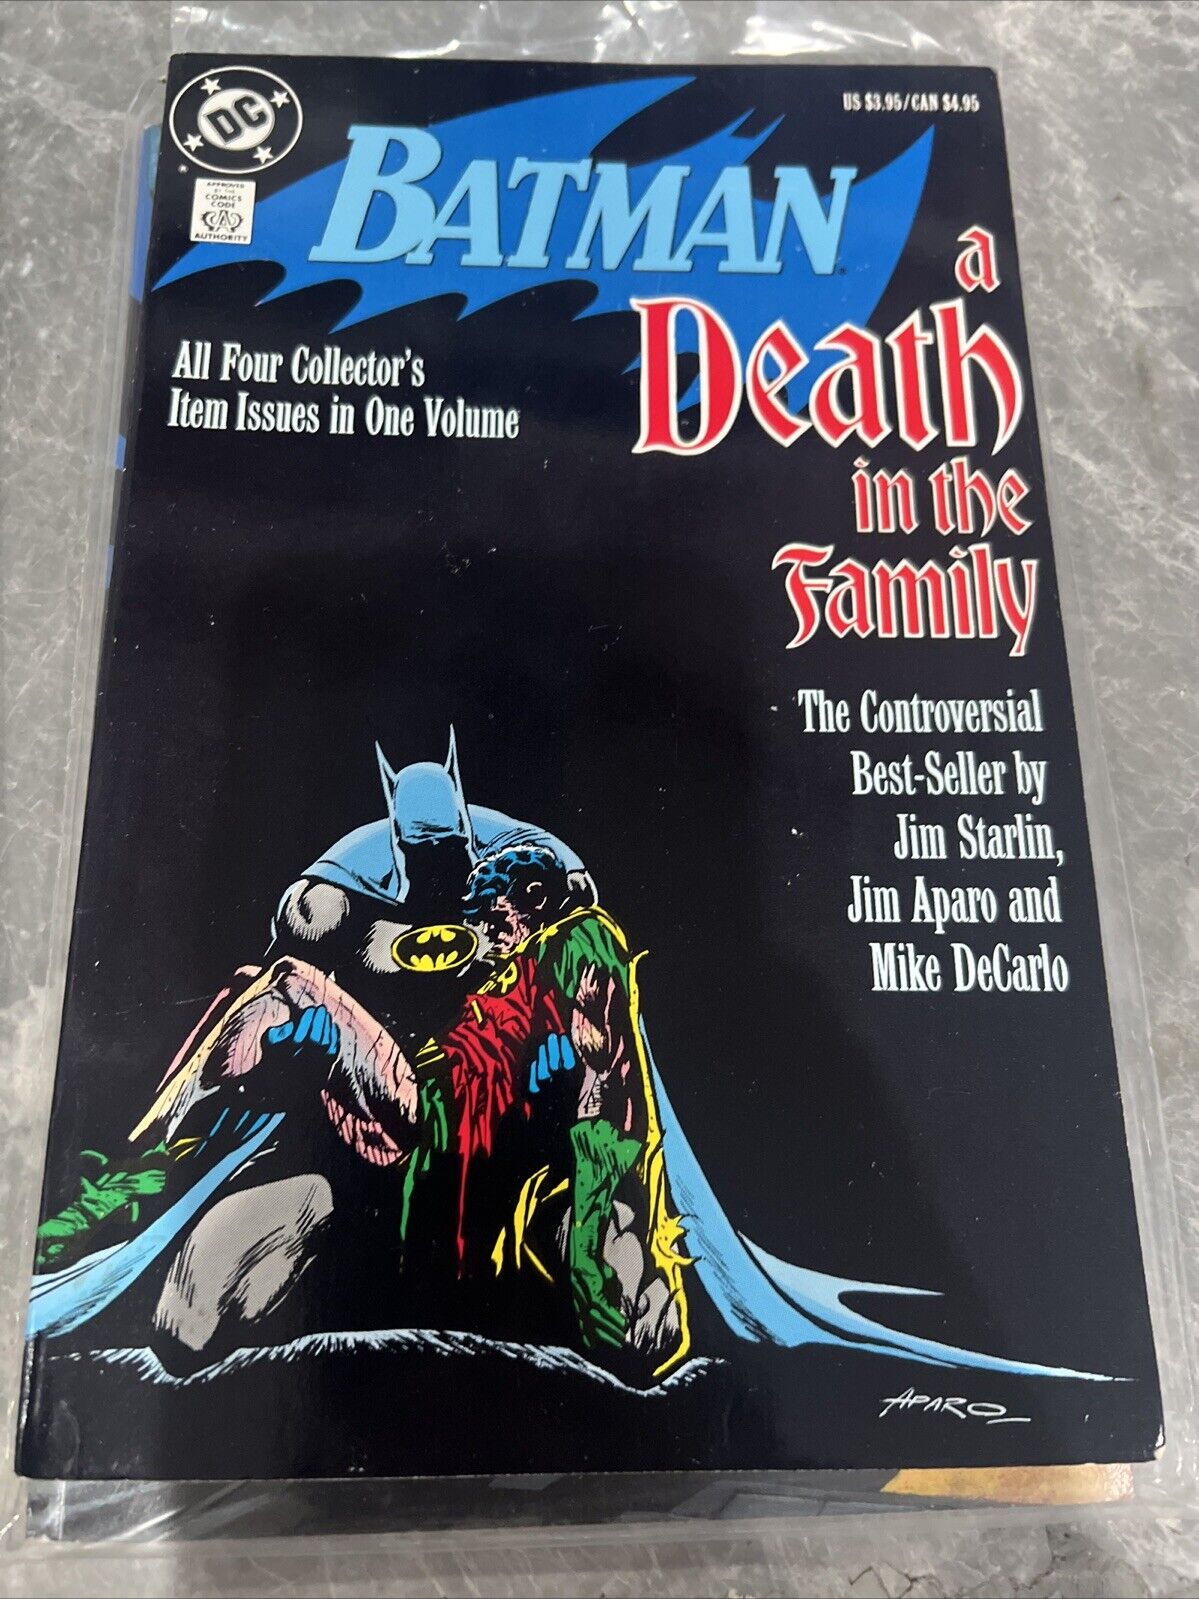 Batman “A DEATH IN THE FAMILY” TPB First Printing; DC Comics; 1988 